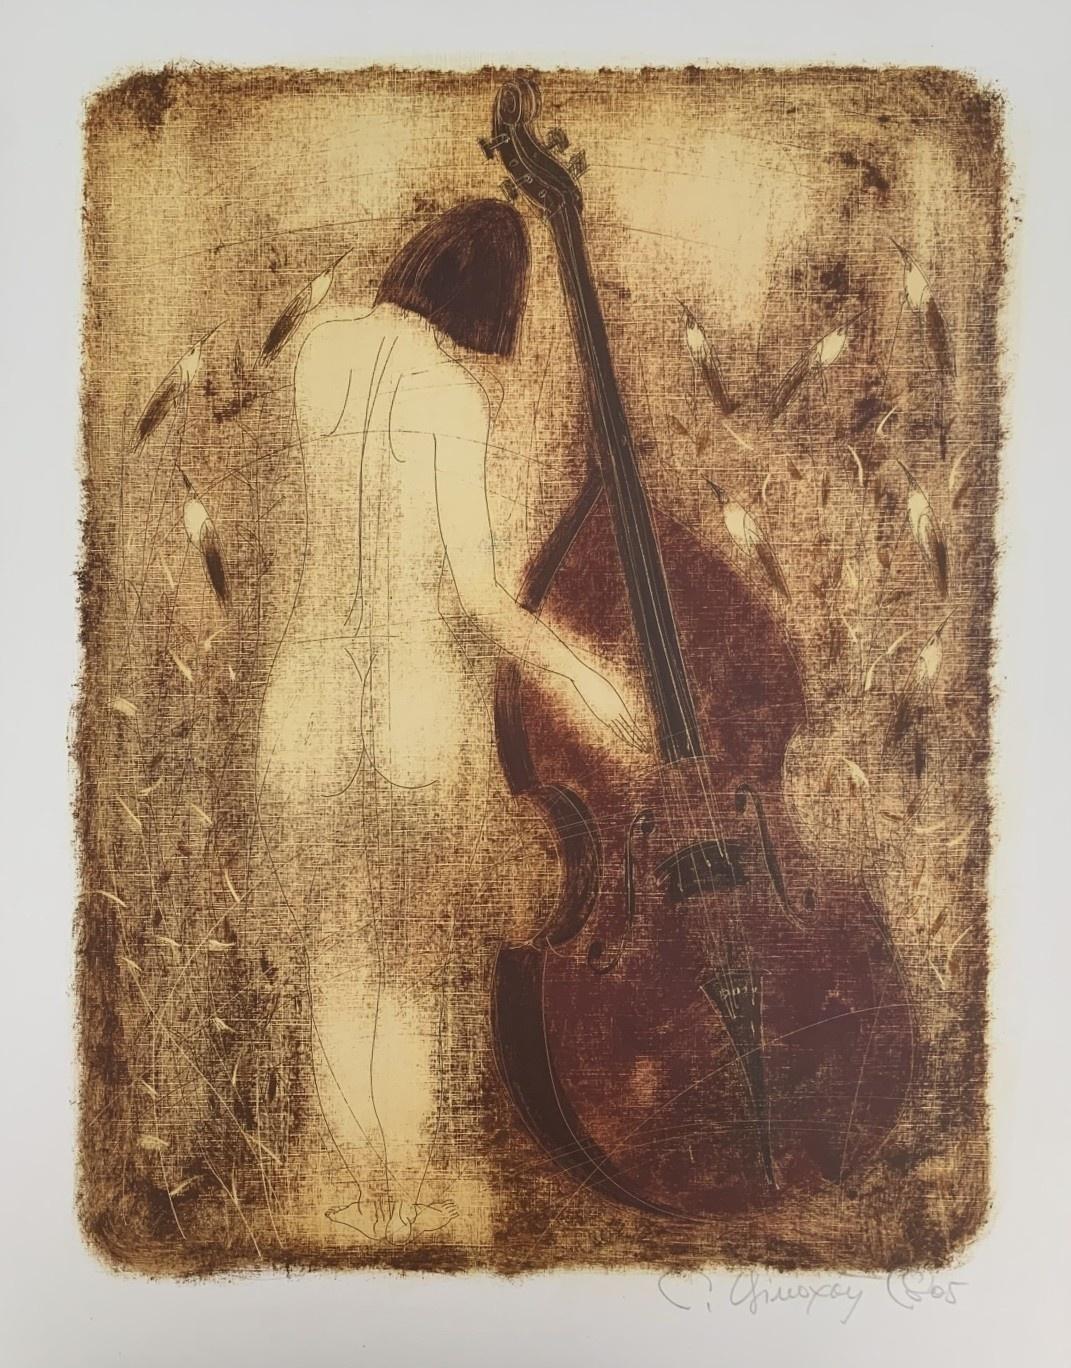 Nude with Double bass. Contemporary Figurative Monotype Print, European artist - Brown Figurative Print by Siergiej Timochow